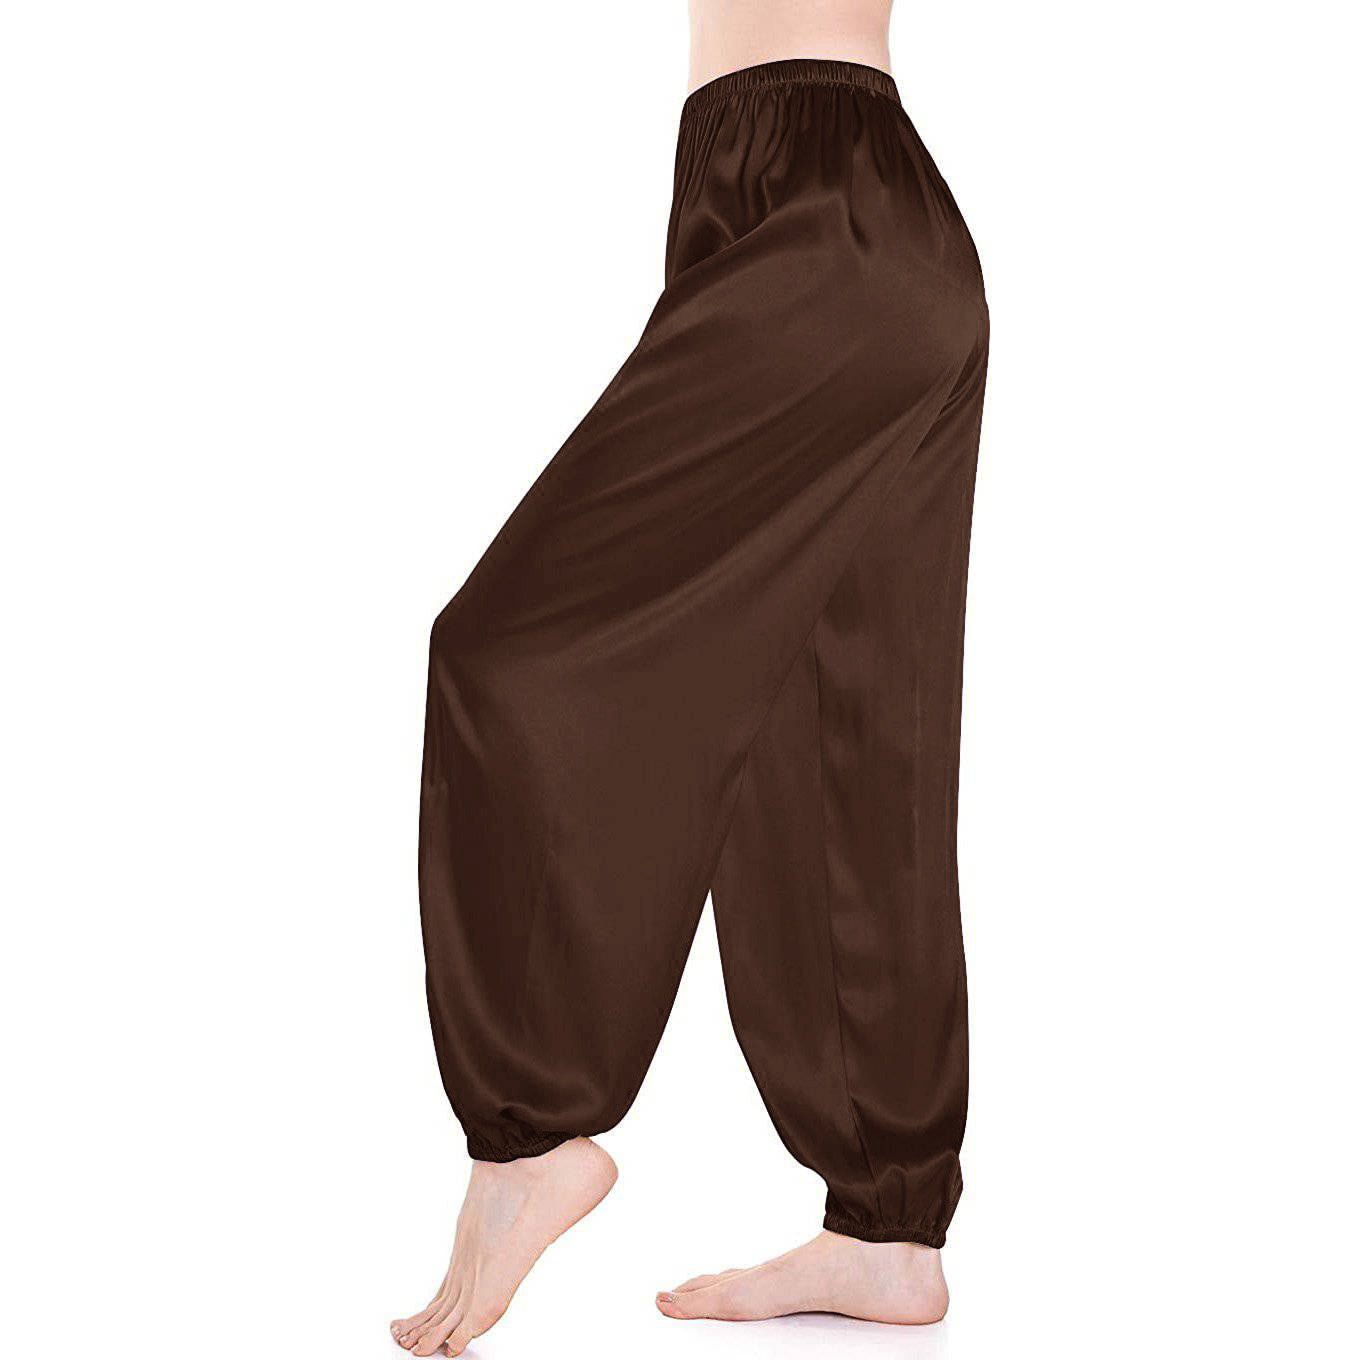 Harem Pants for Men Solid Elastic Waist Drawstring Wide Leg Pants Casual  Baggy Plus Size Stretchy Lounge Trousers 